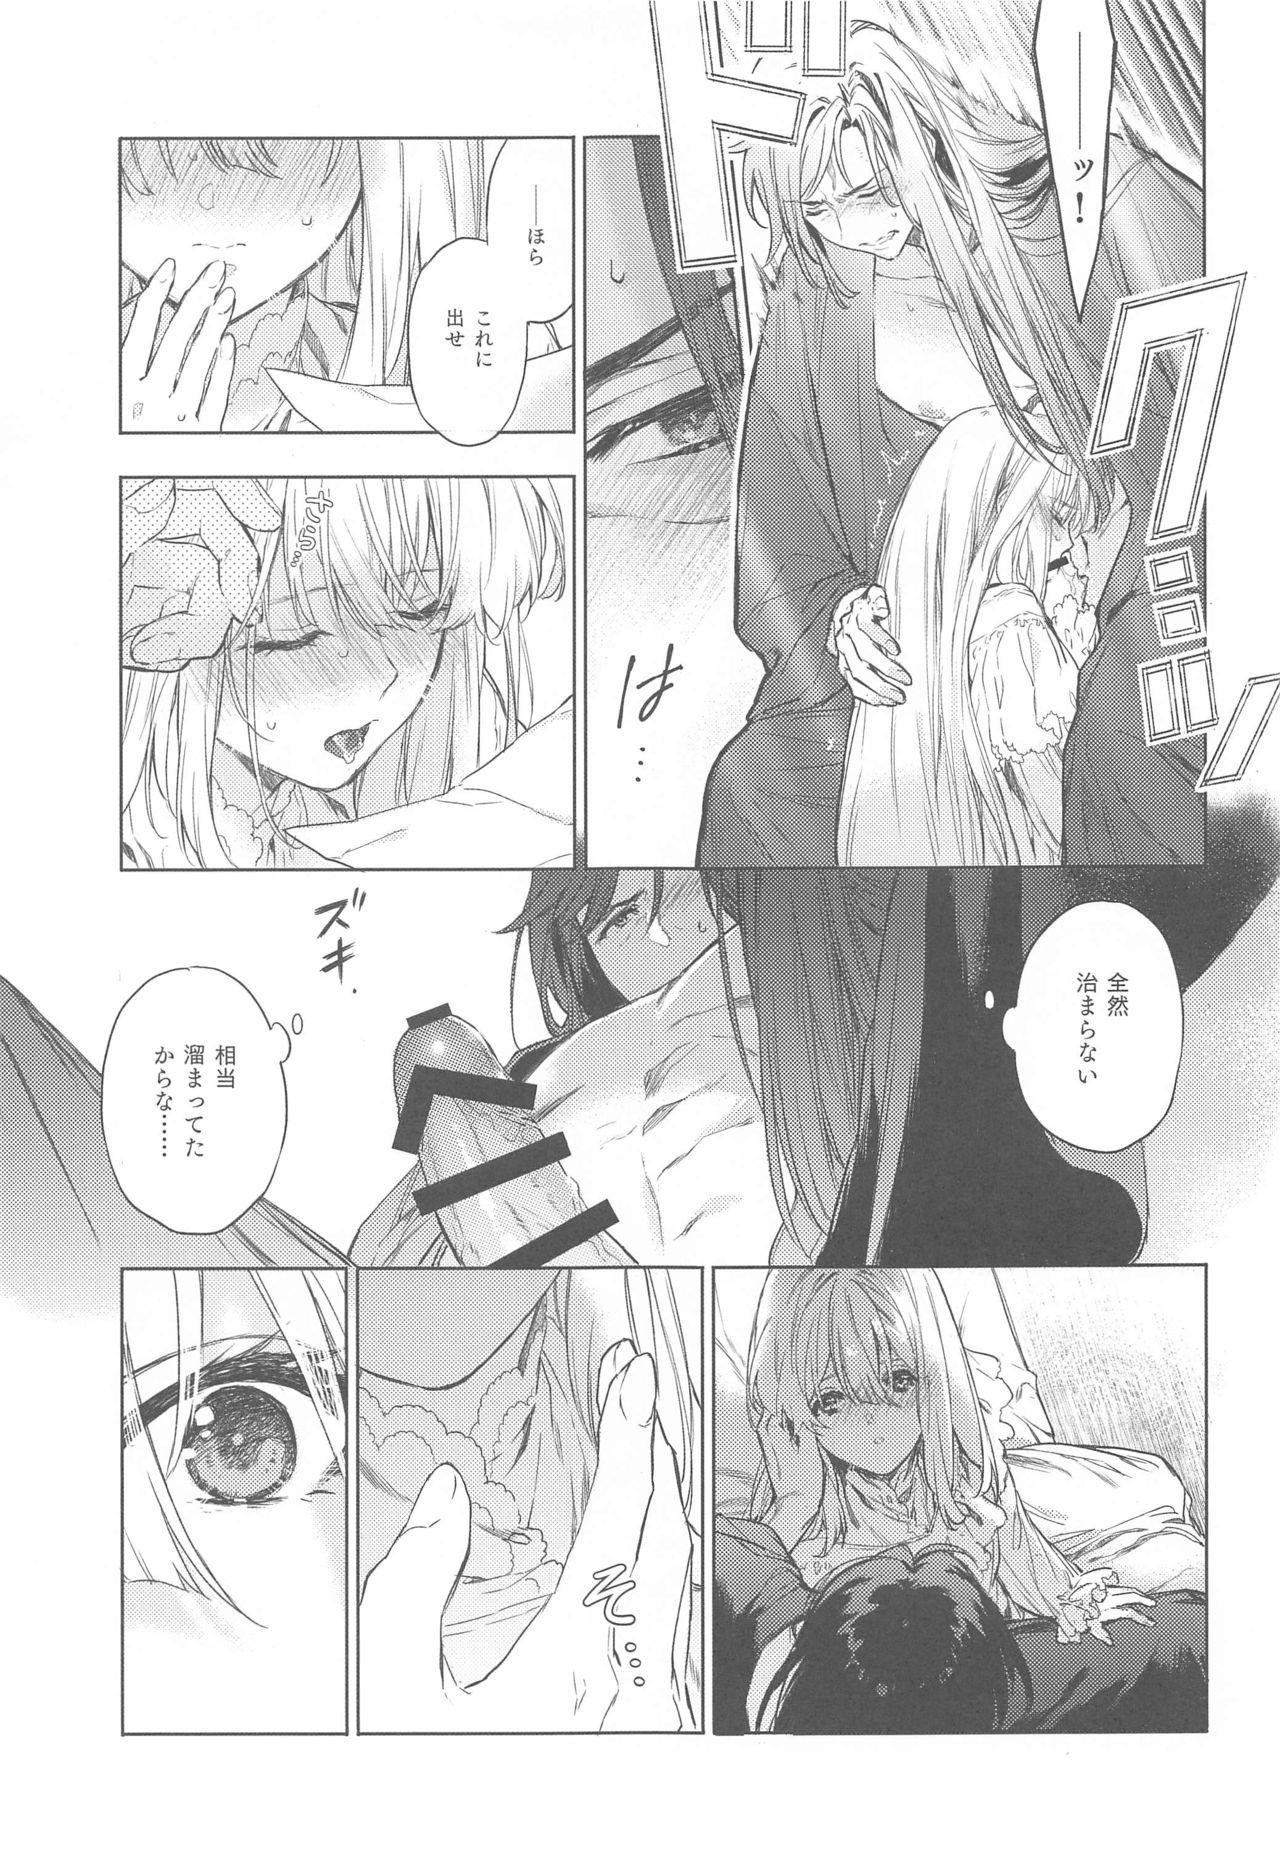 Trap Scars of love - Violet evergarden Piroca - Page 8